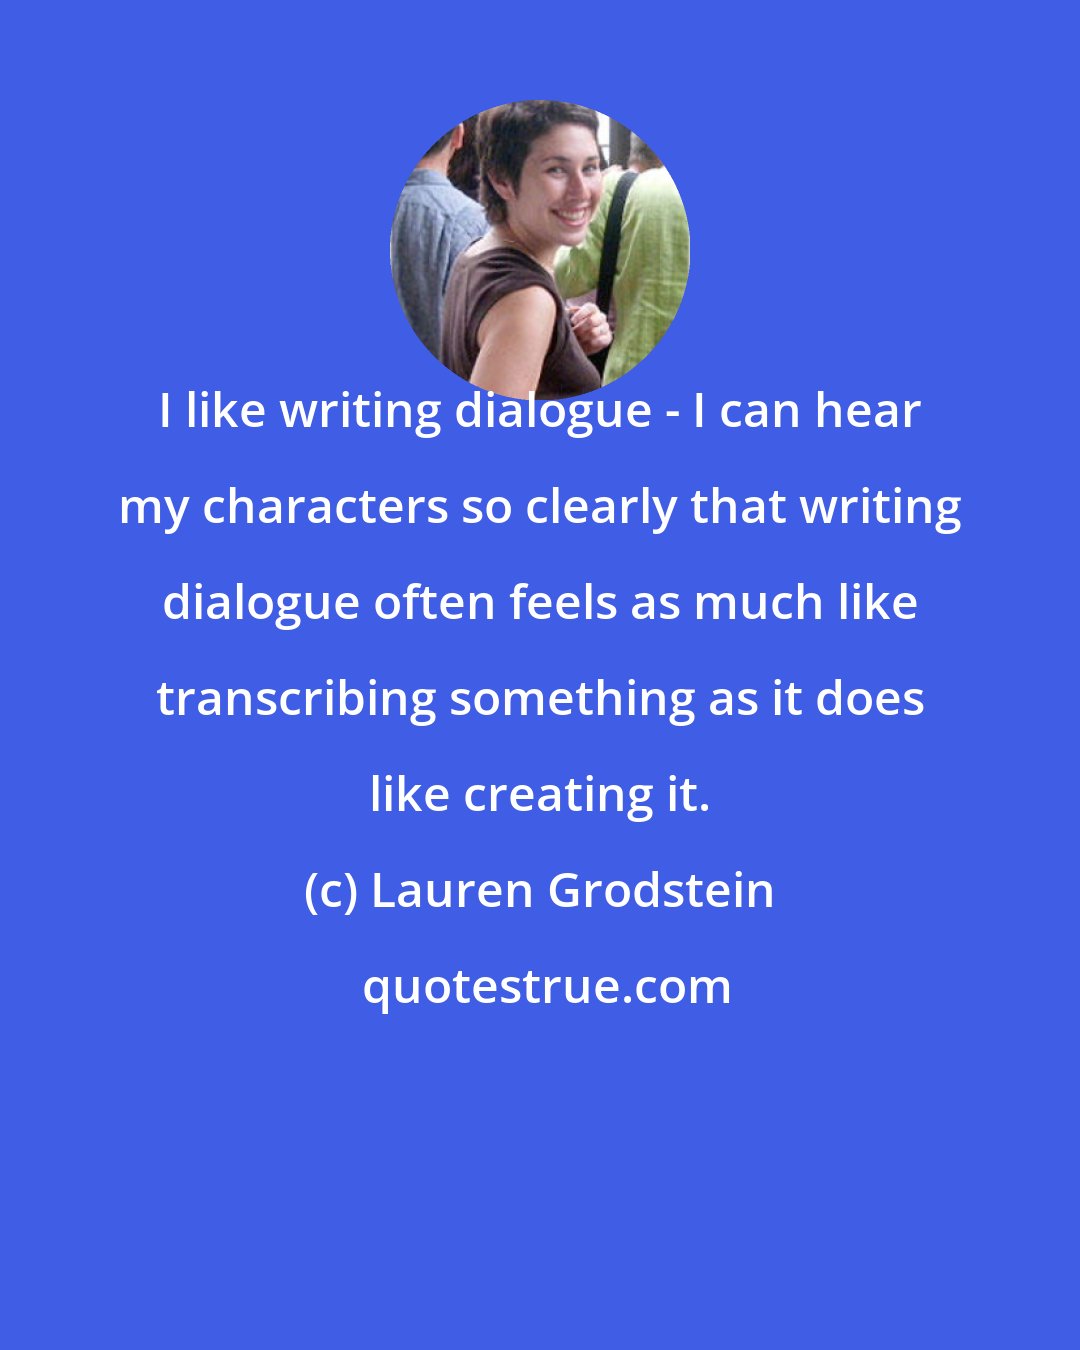 Lauren Grodstein: I like writing dialogue - I can hear my characters so clearly that writing dialogue often feels as much like transcribing something as it does like creating it.